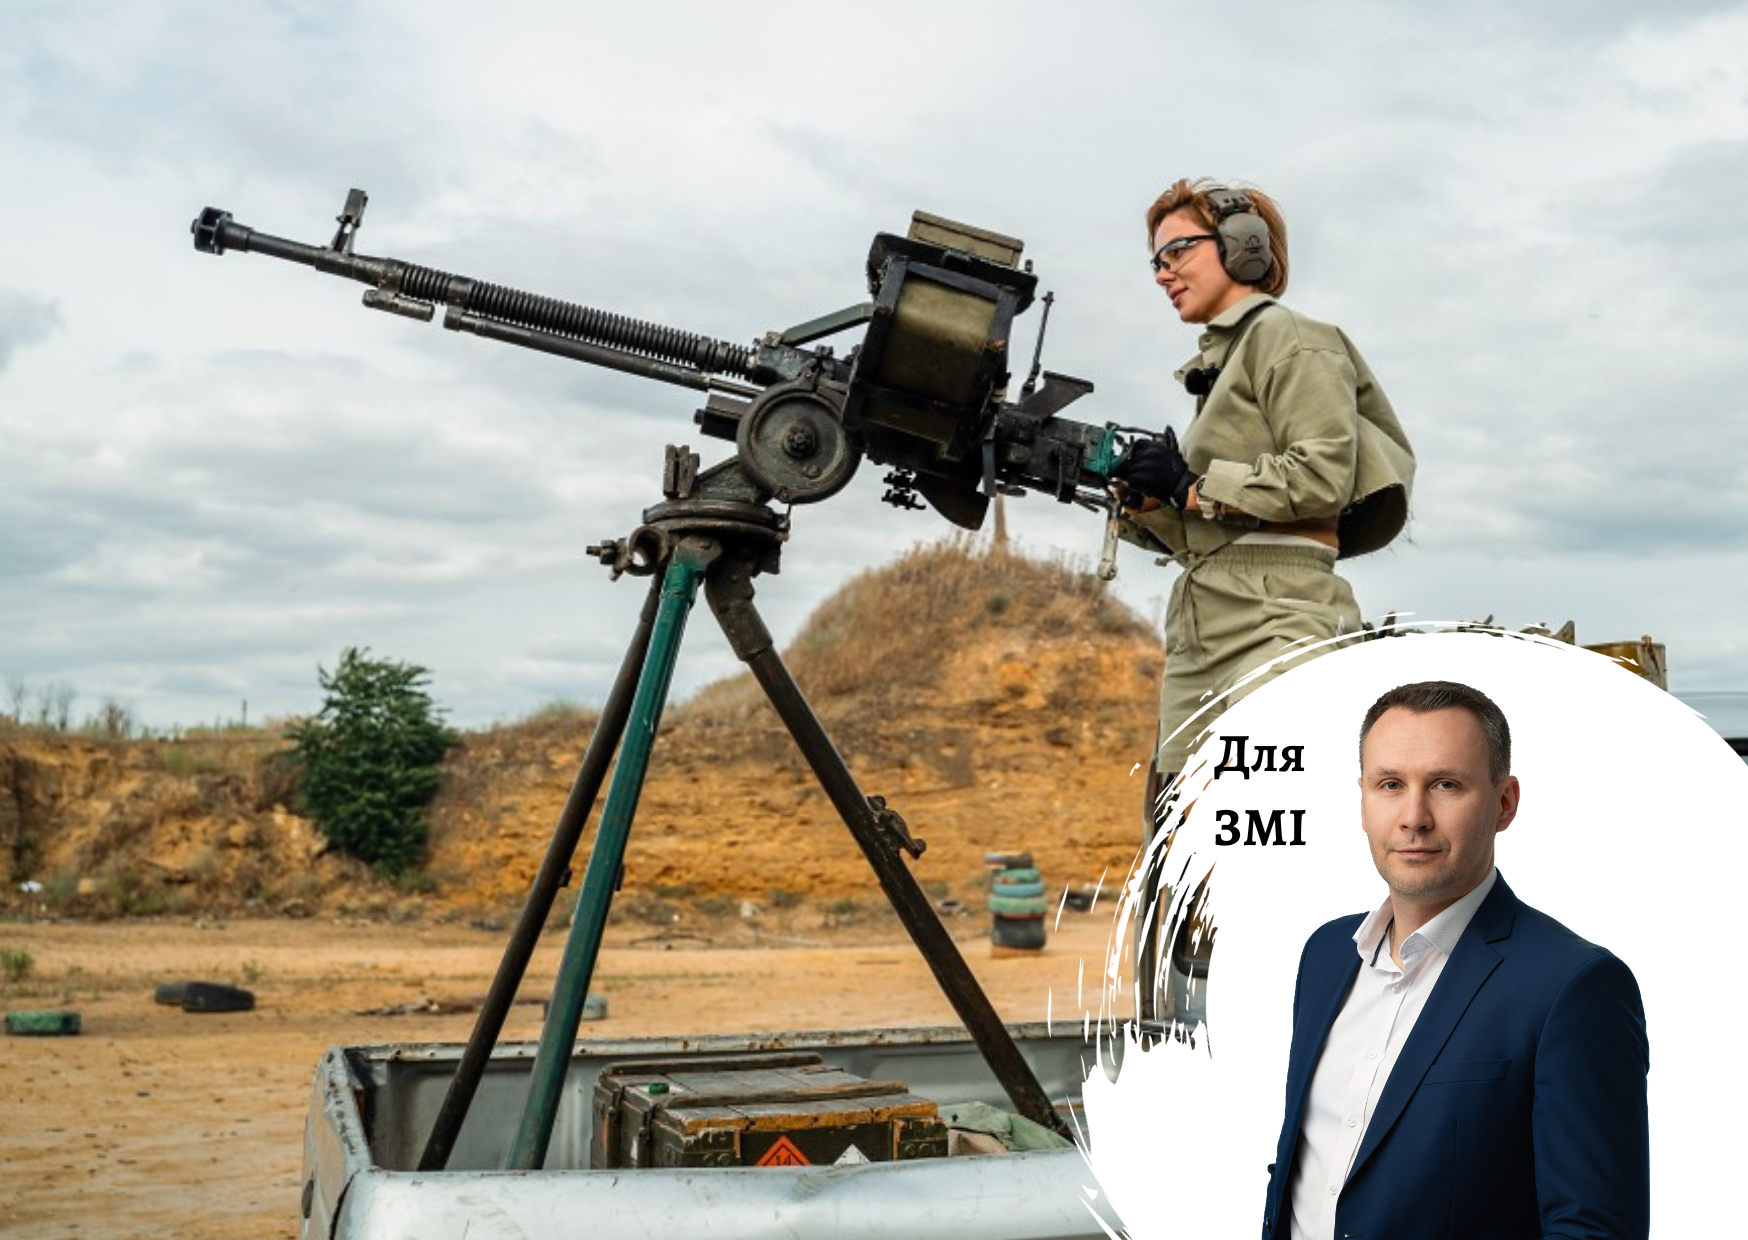 How a personal brand helped Tetyana Yashkina sell weapons worth about 80 million UAH - comments on the weapons market from Pro-Consulting CEO Alexander Sokolov. FORBES